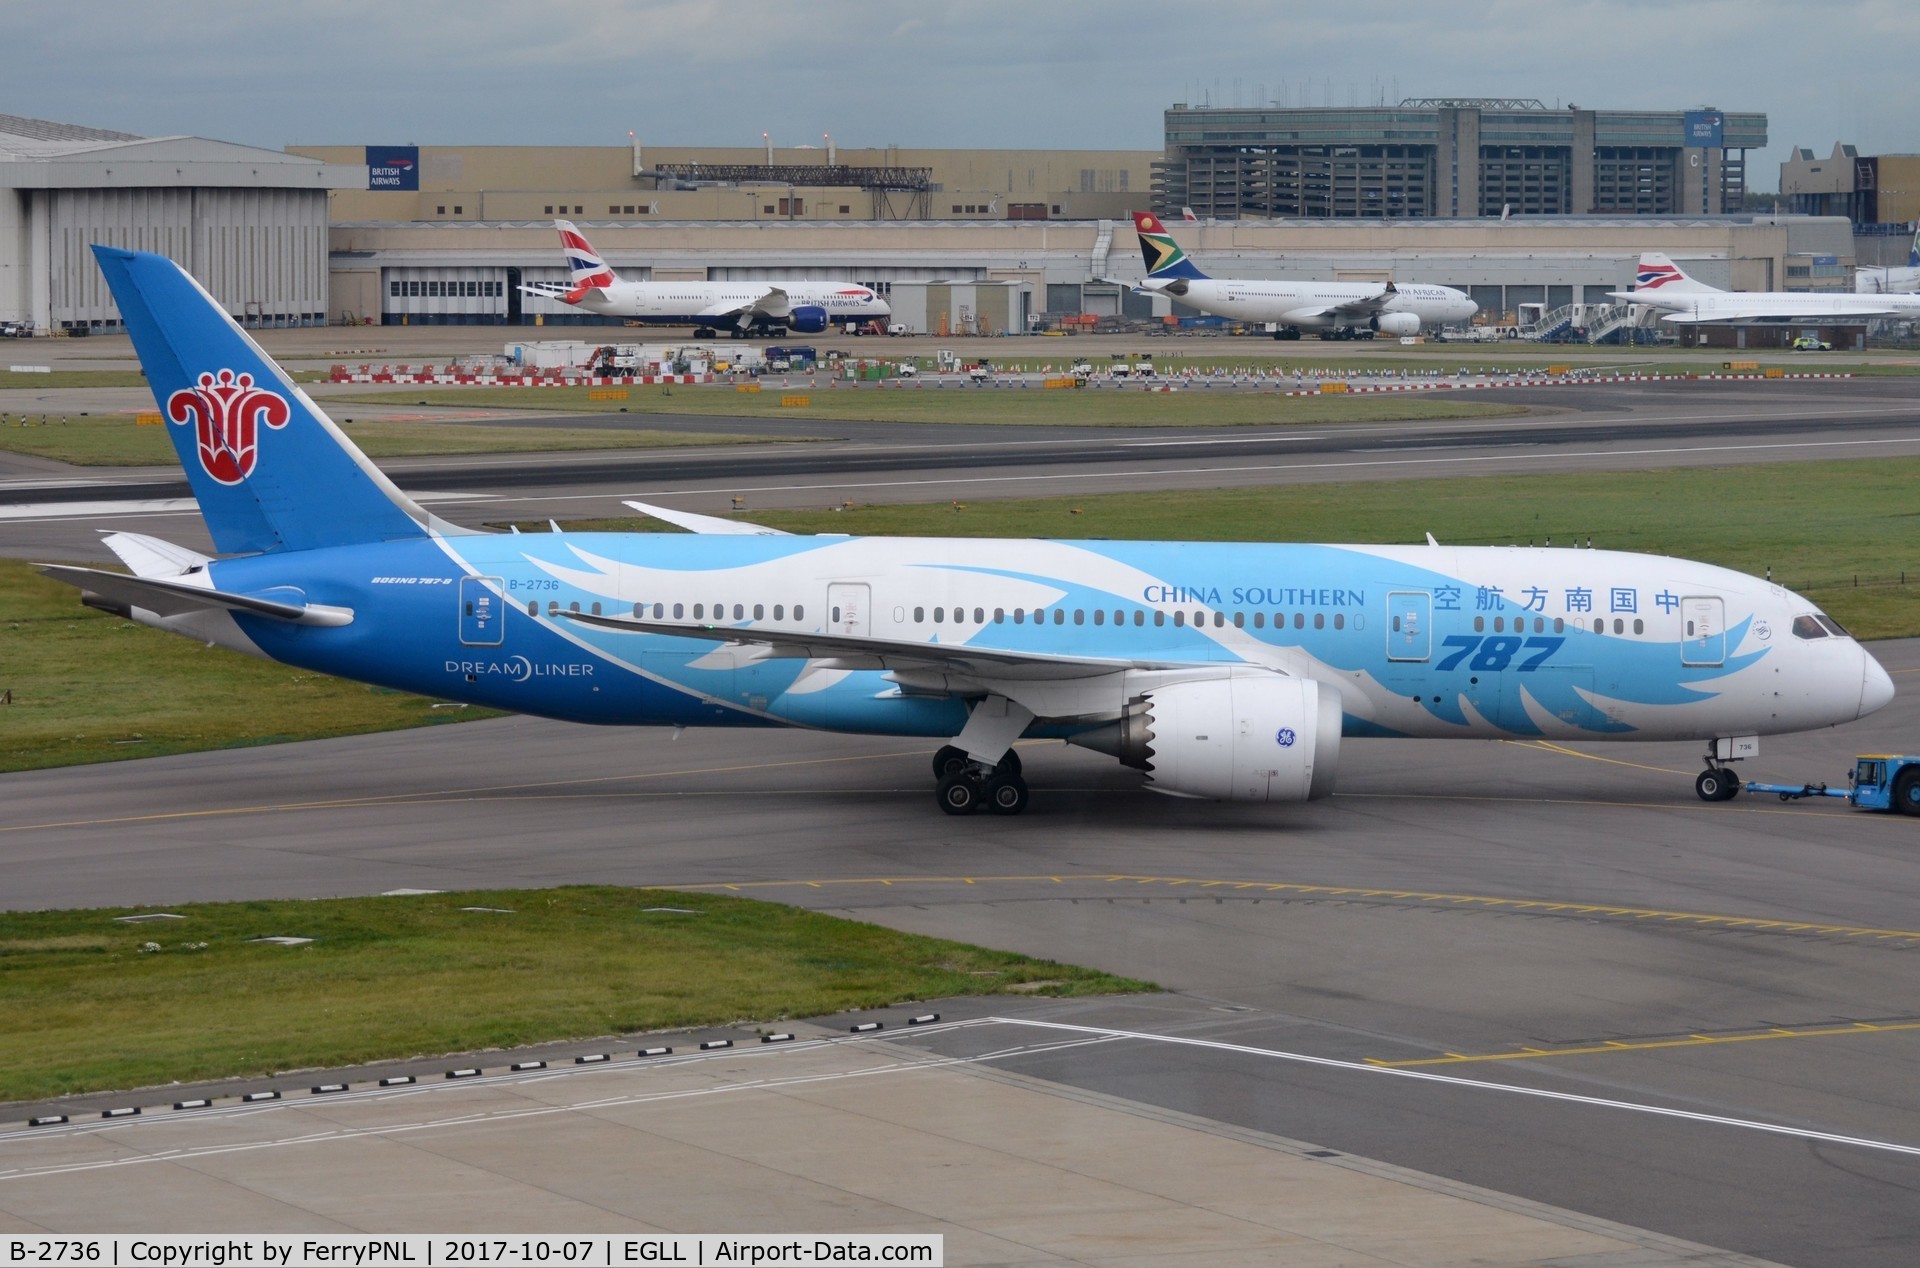 B-2736, 2013 Boeing 787-8 Dreamliner C/N 34929, China Southern B788 under tow to T4.